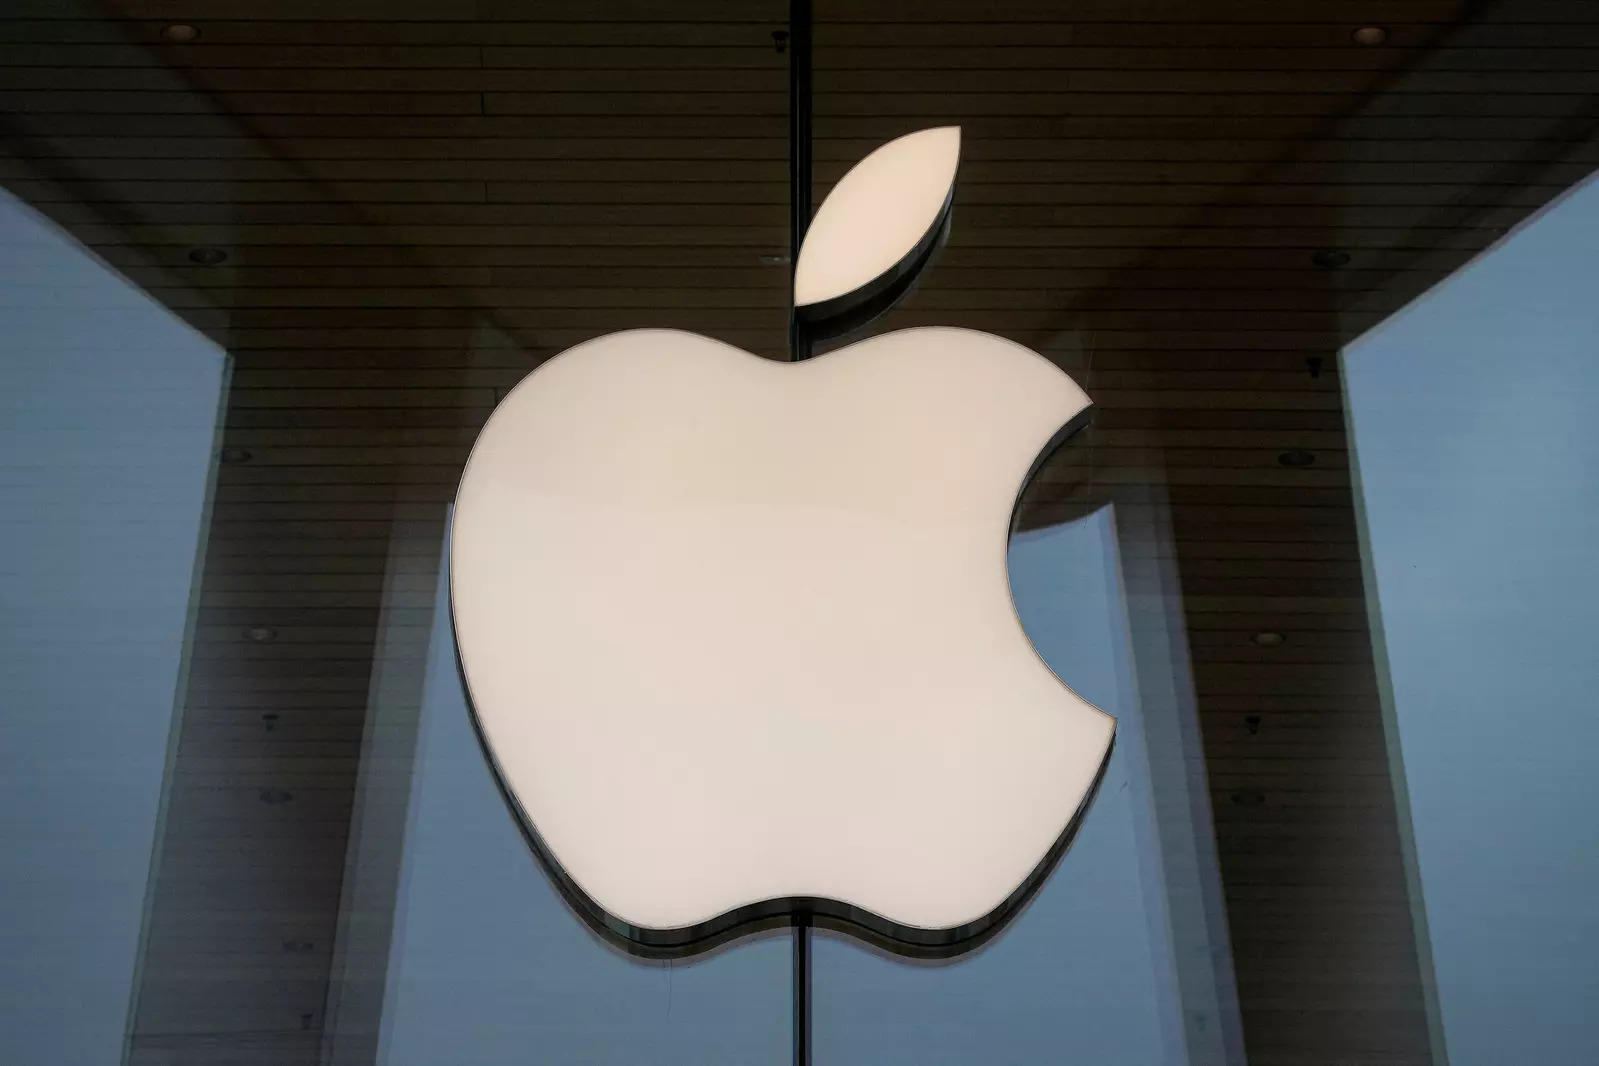 Apple likely to unveil 27-inch mini LED display in early 2023. (Image source: Reuters)